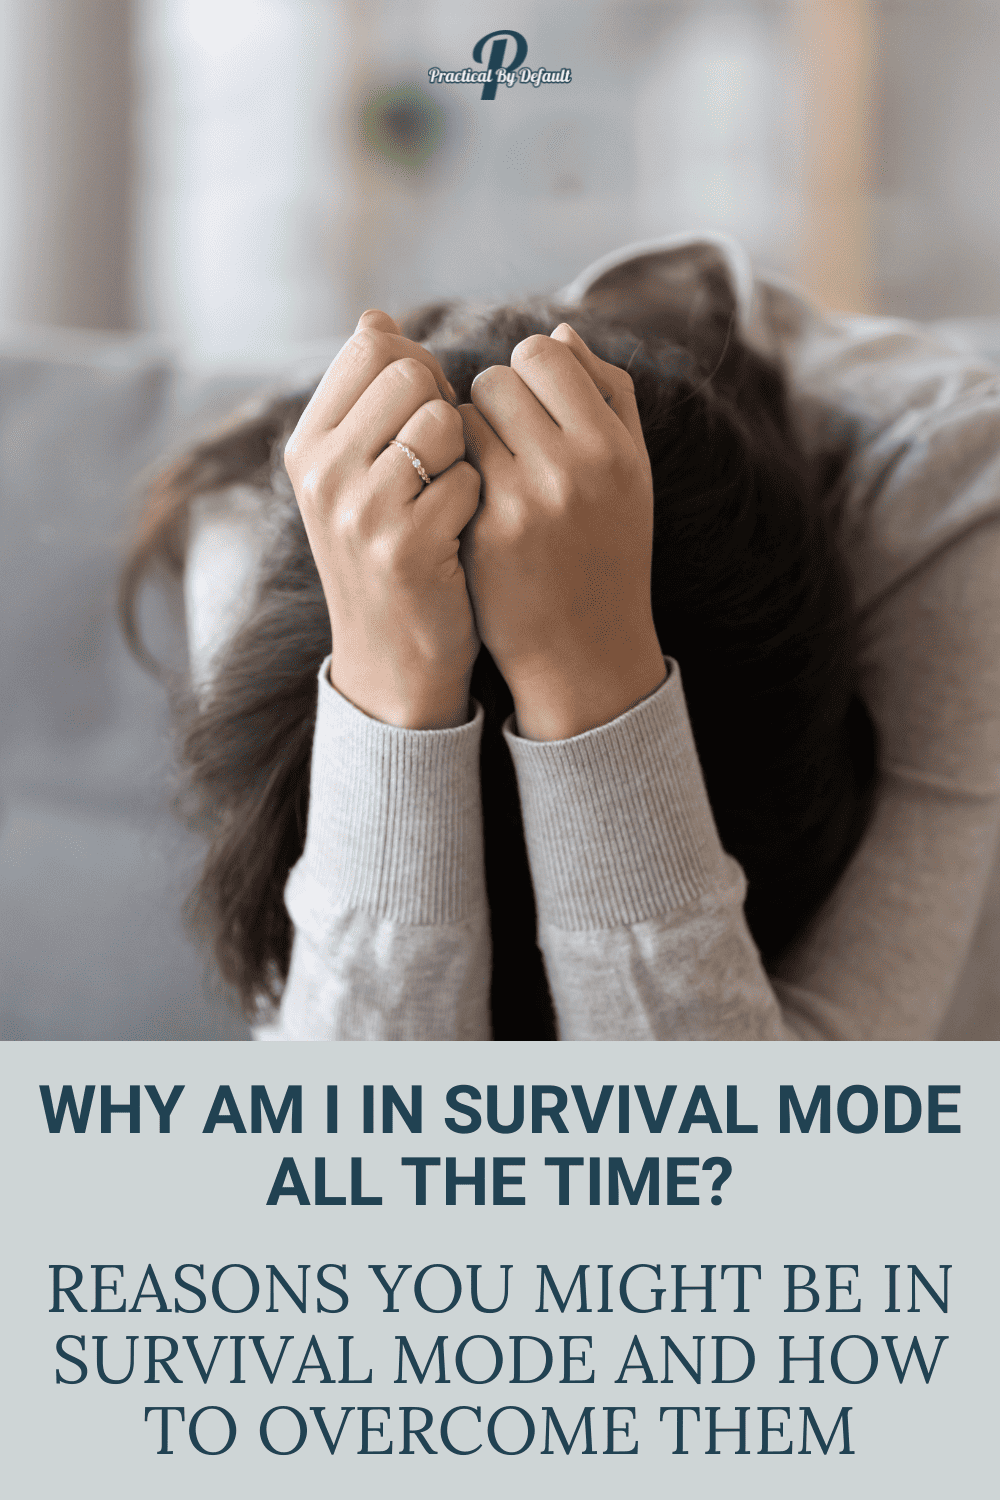 Why Am I in Survival Mode?